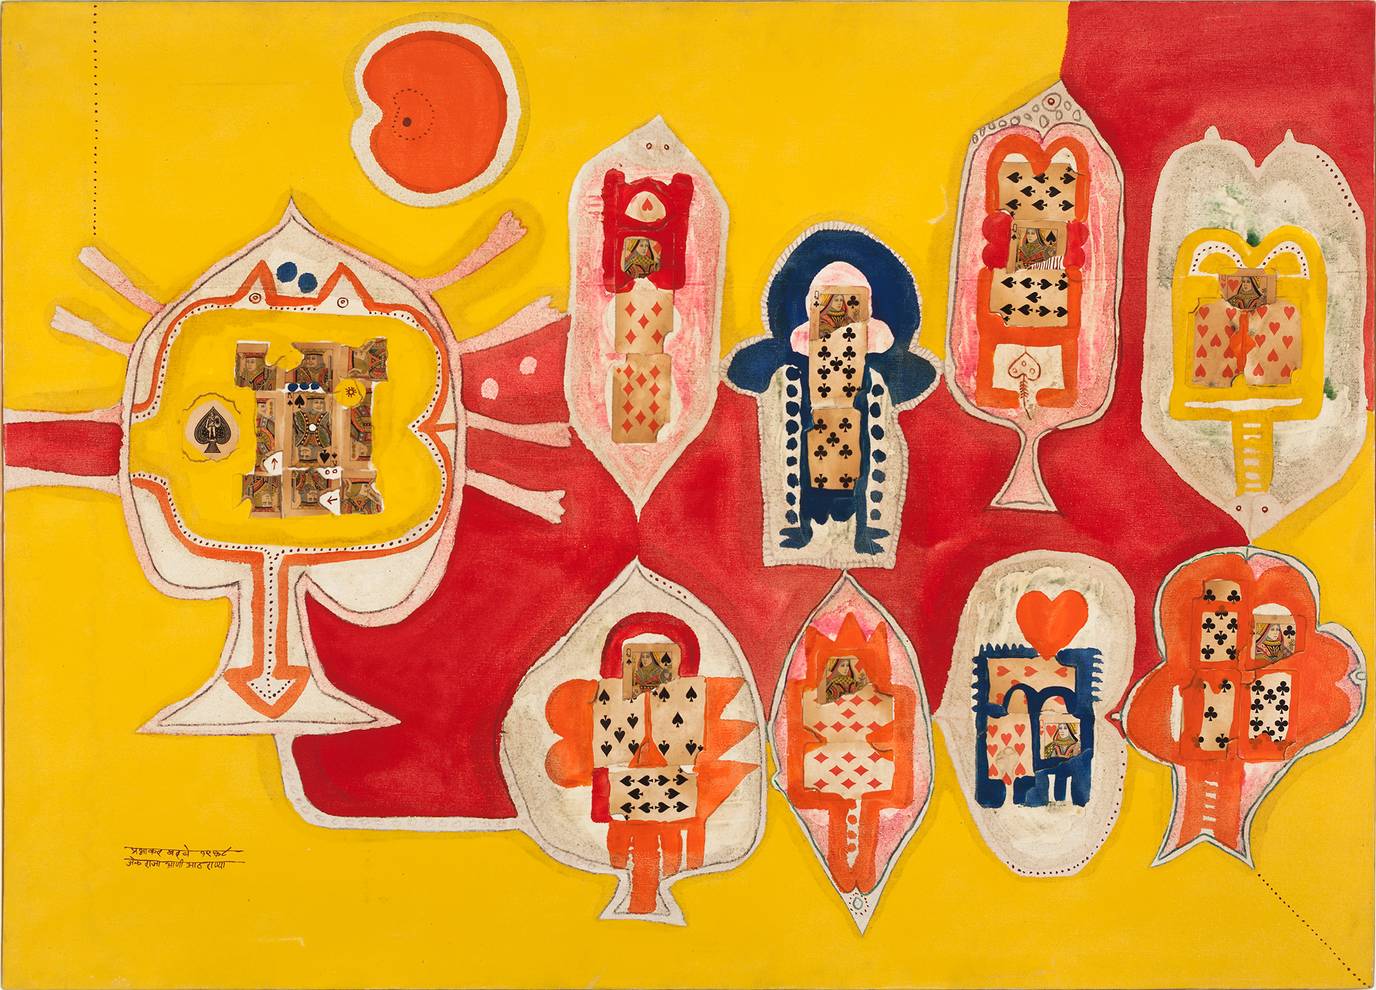 Prabhakar Barwe, King and Queen of Spades, 1967, Oil and paper on canvas, 39 1/4 x 54 1/8 in.